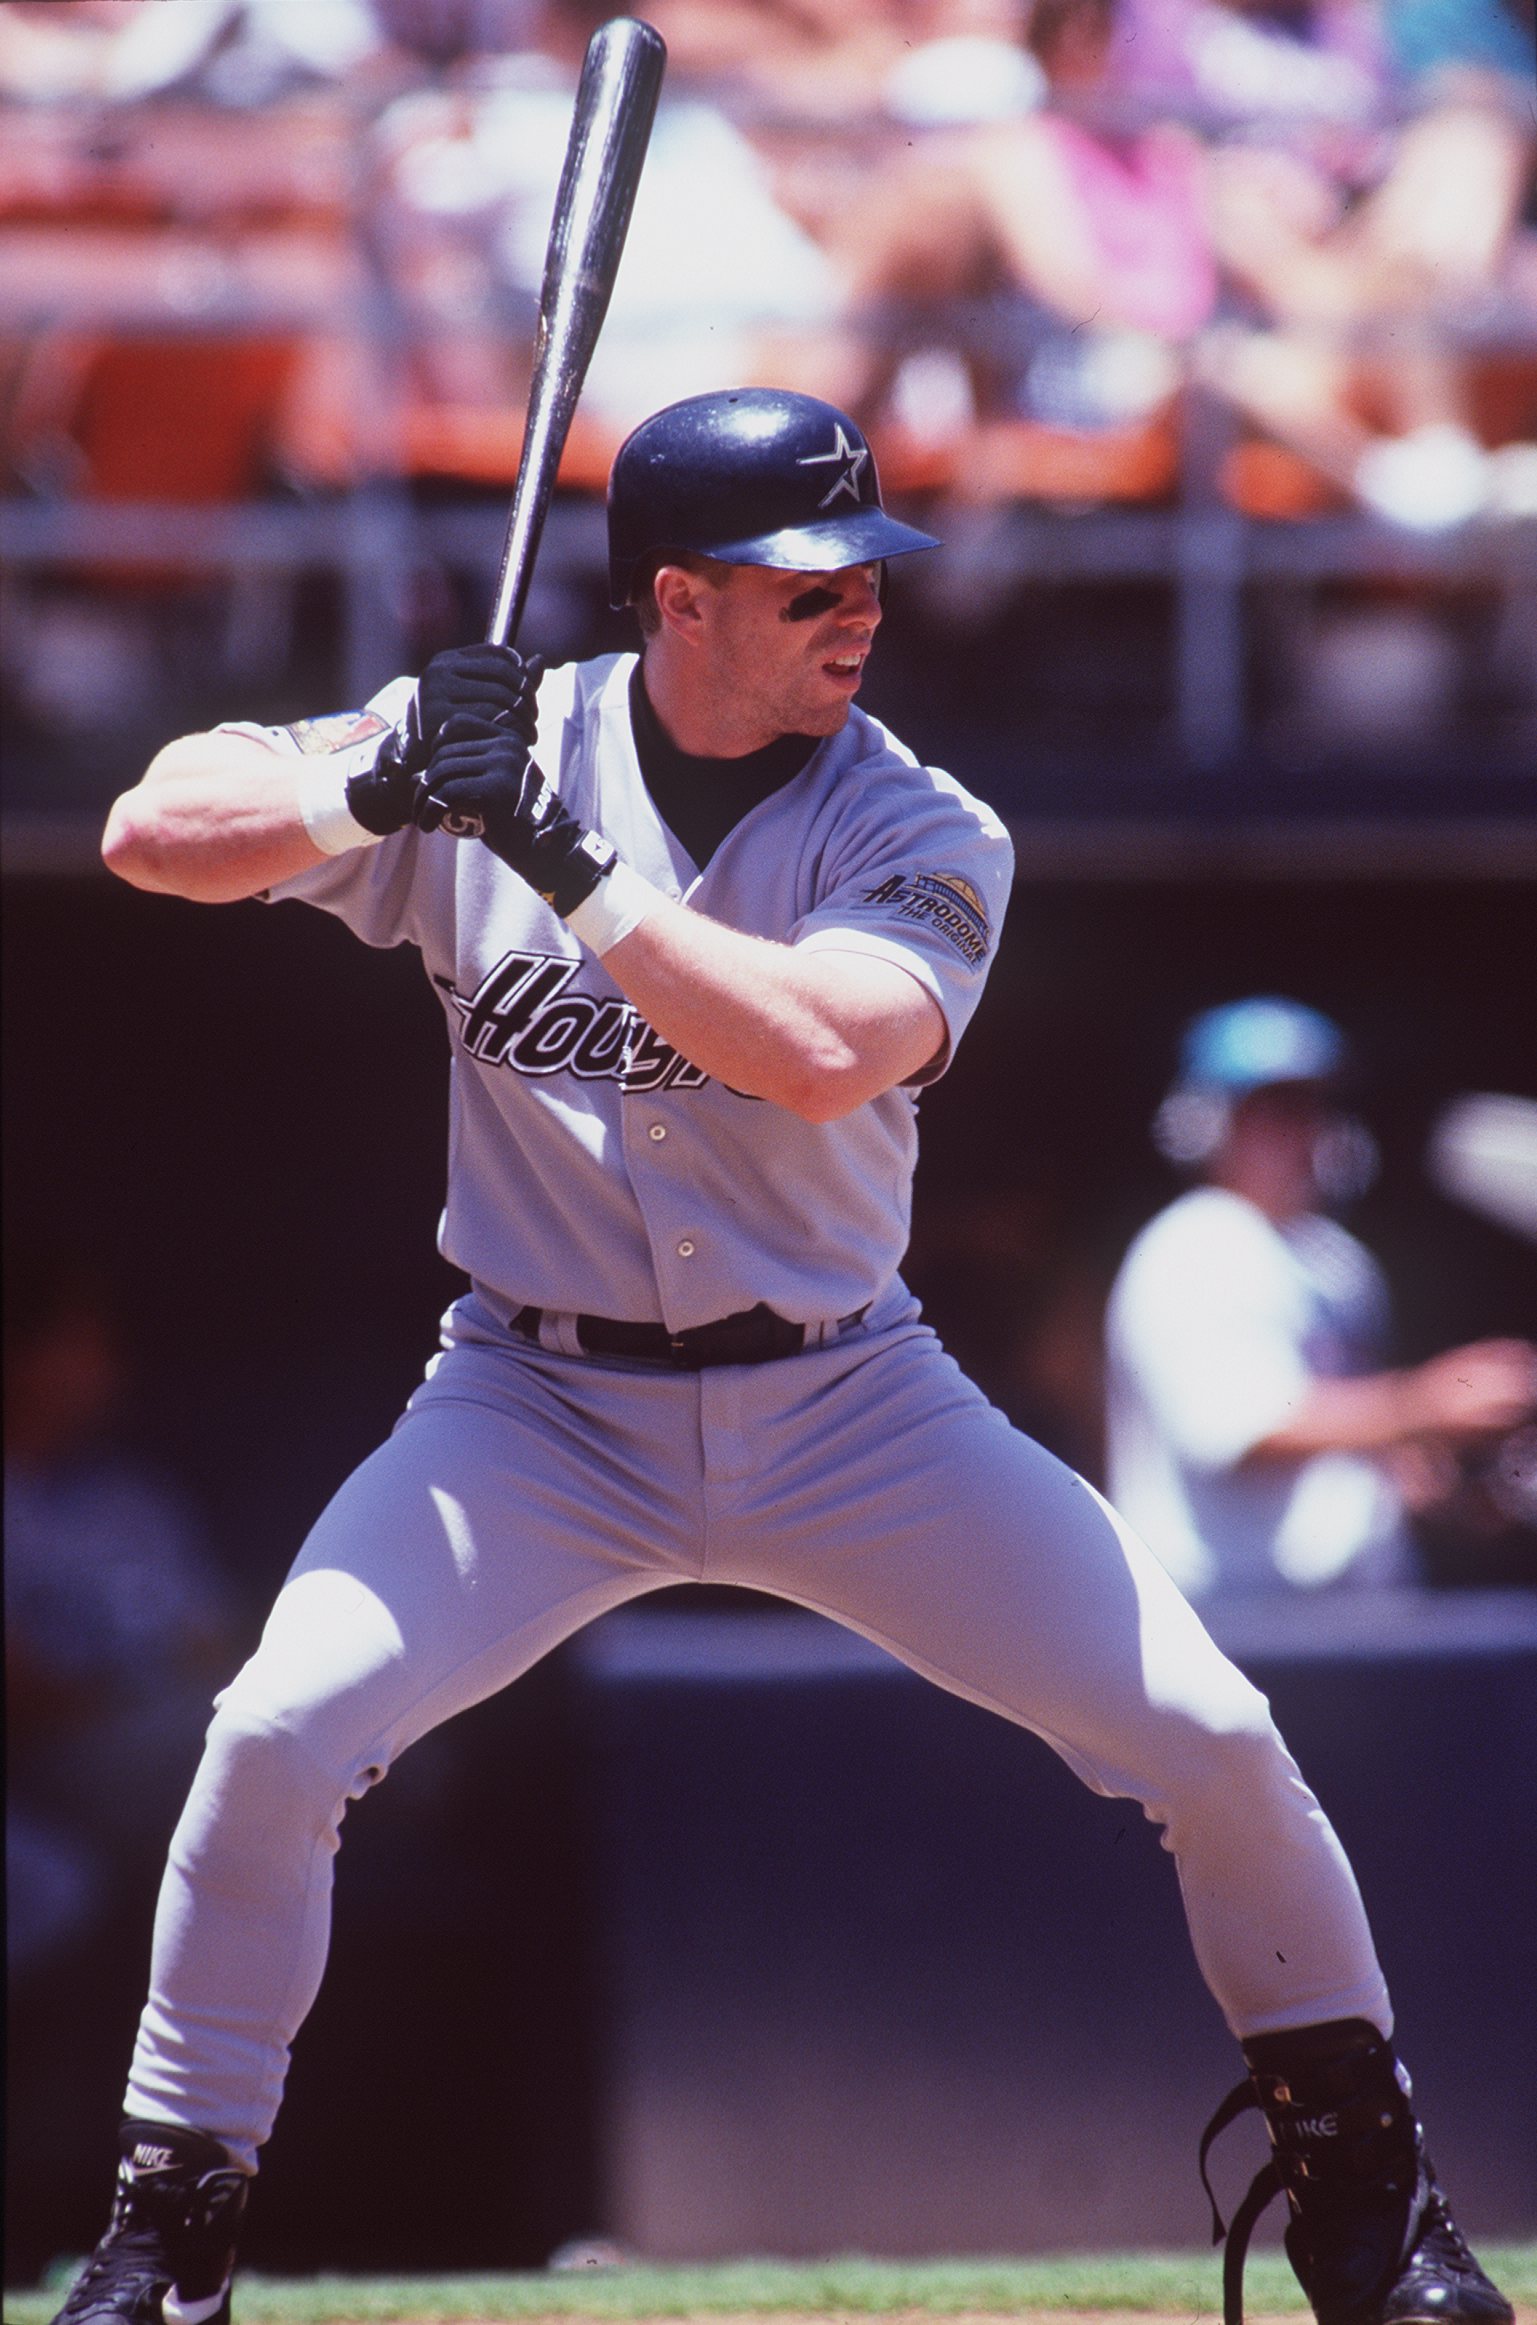 19 JUN 1994:  JEFF BAGWELL AT BAT DURING AN ASTROS V PADRES GAME IN SAN DIEGO, CALIFORNIA. Mandatory Credit: Jed Jacobson/ALLSPORT